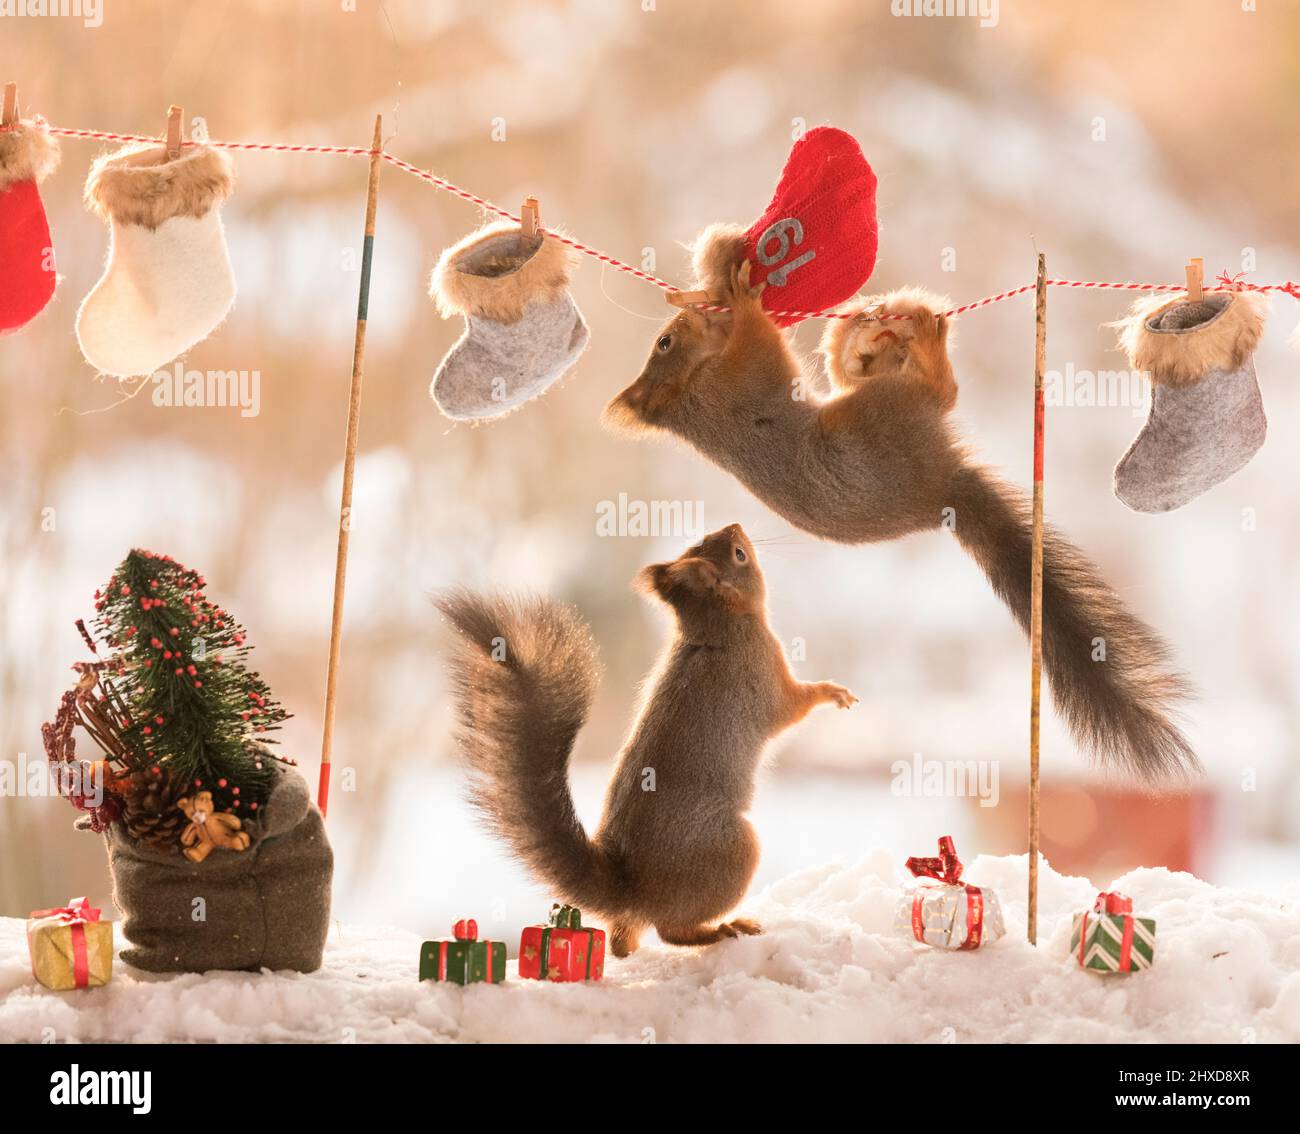 red squirrels with gift stockings Stock Photo